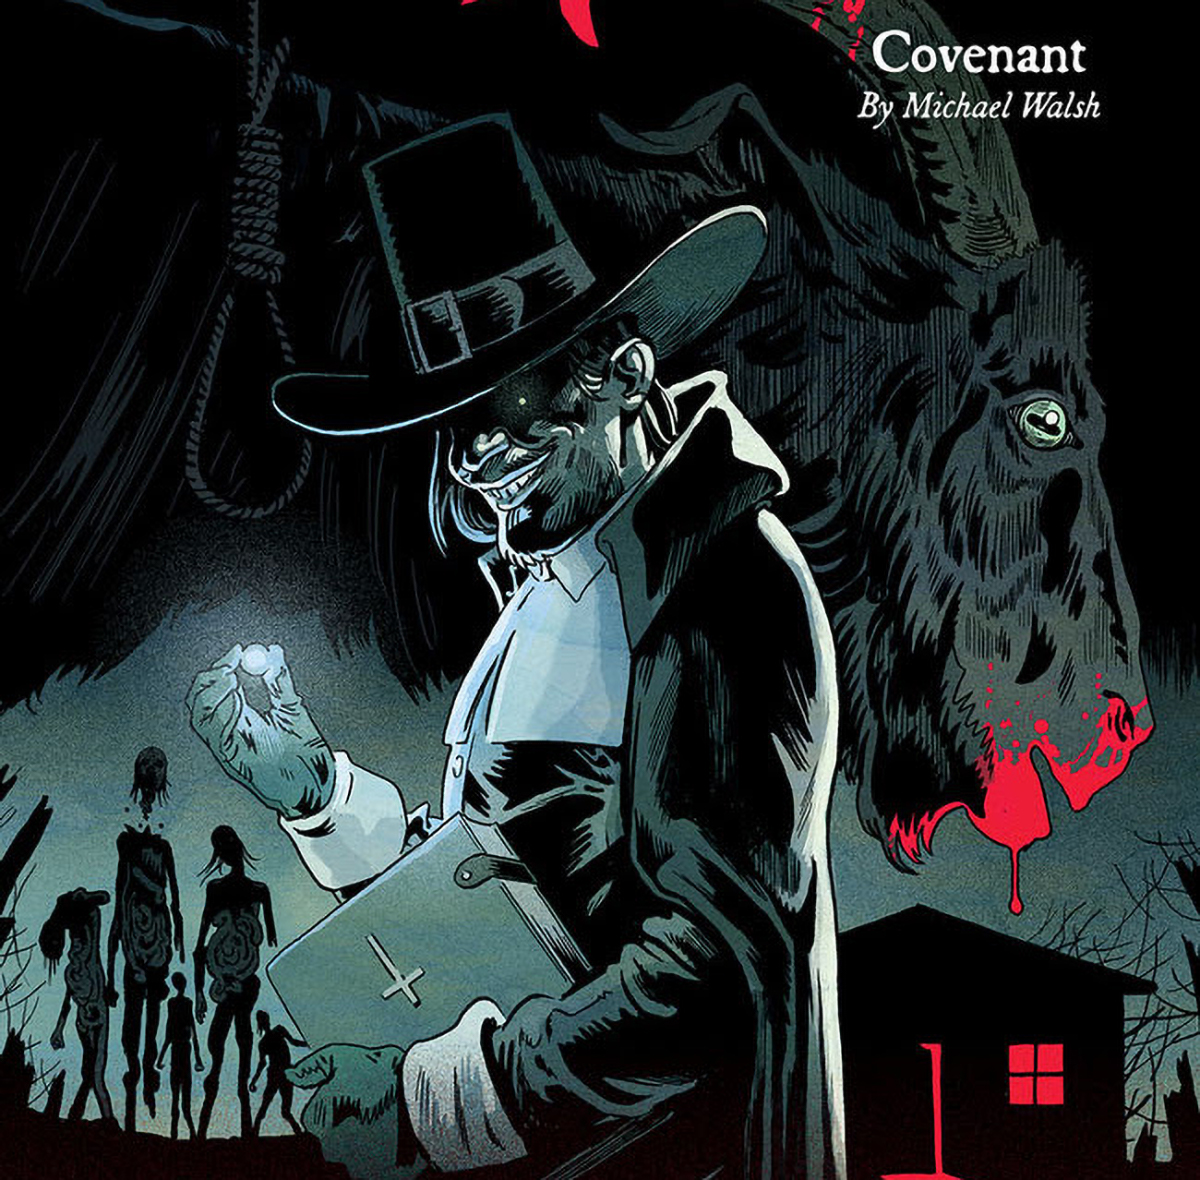 'The Silver Coin' #5 offers moody horror